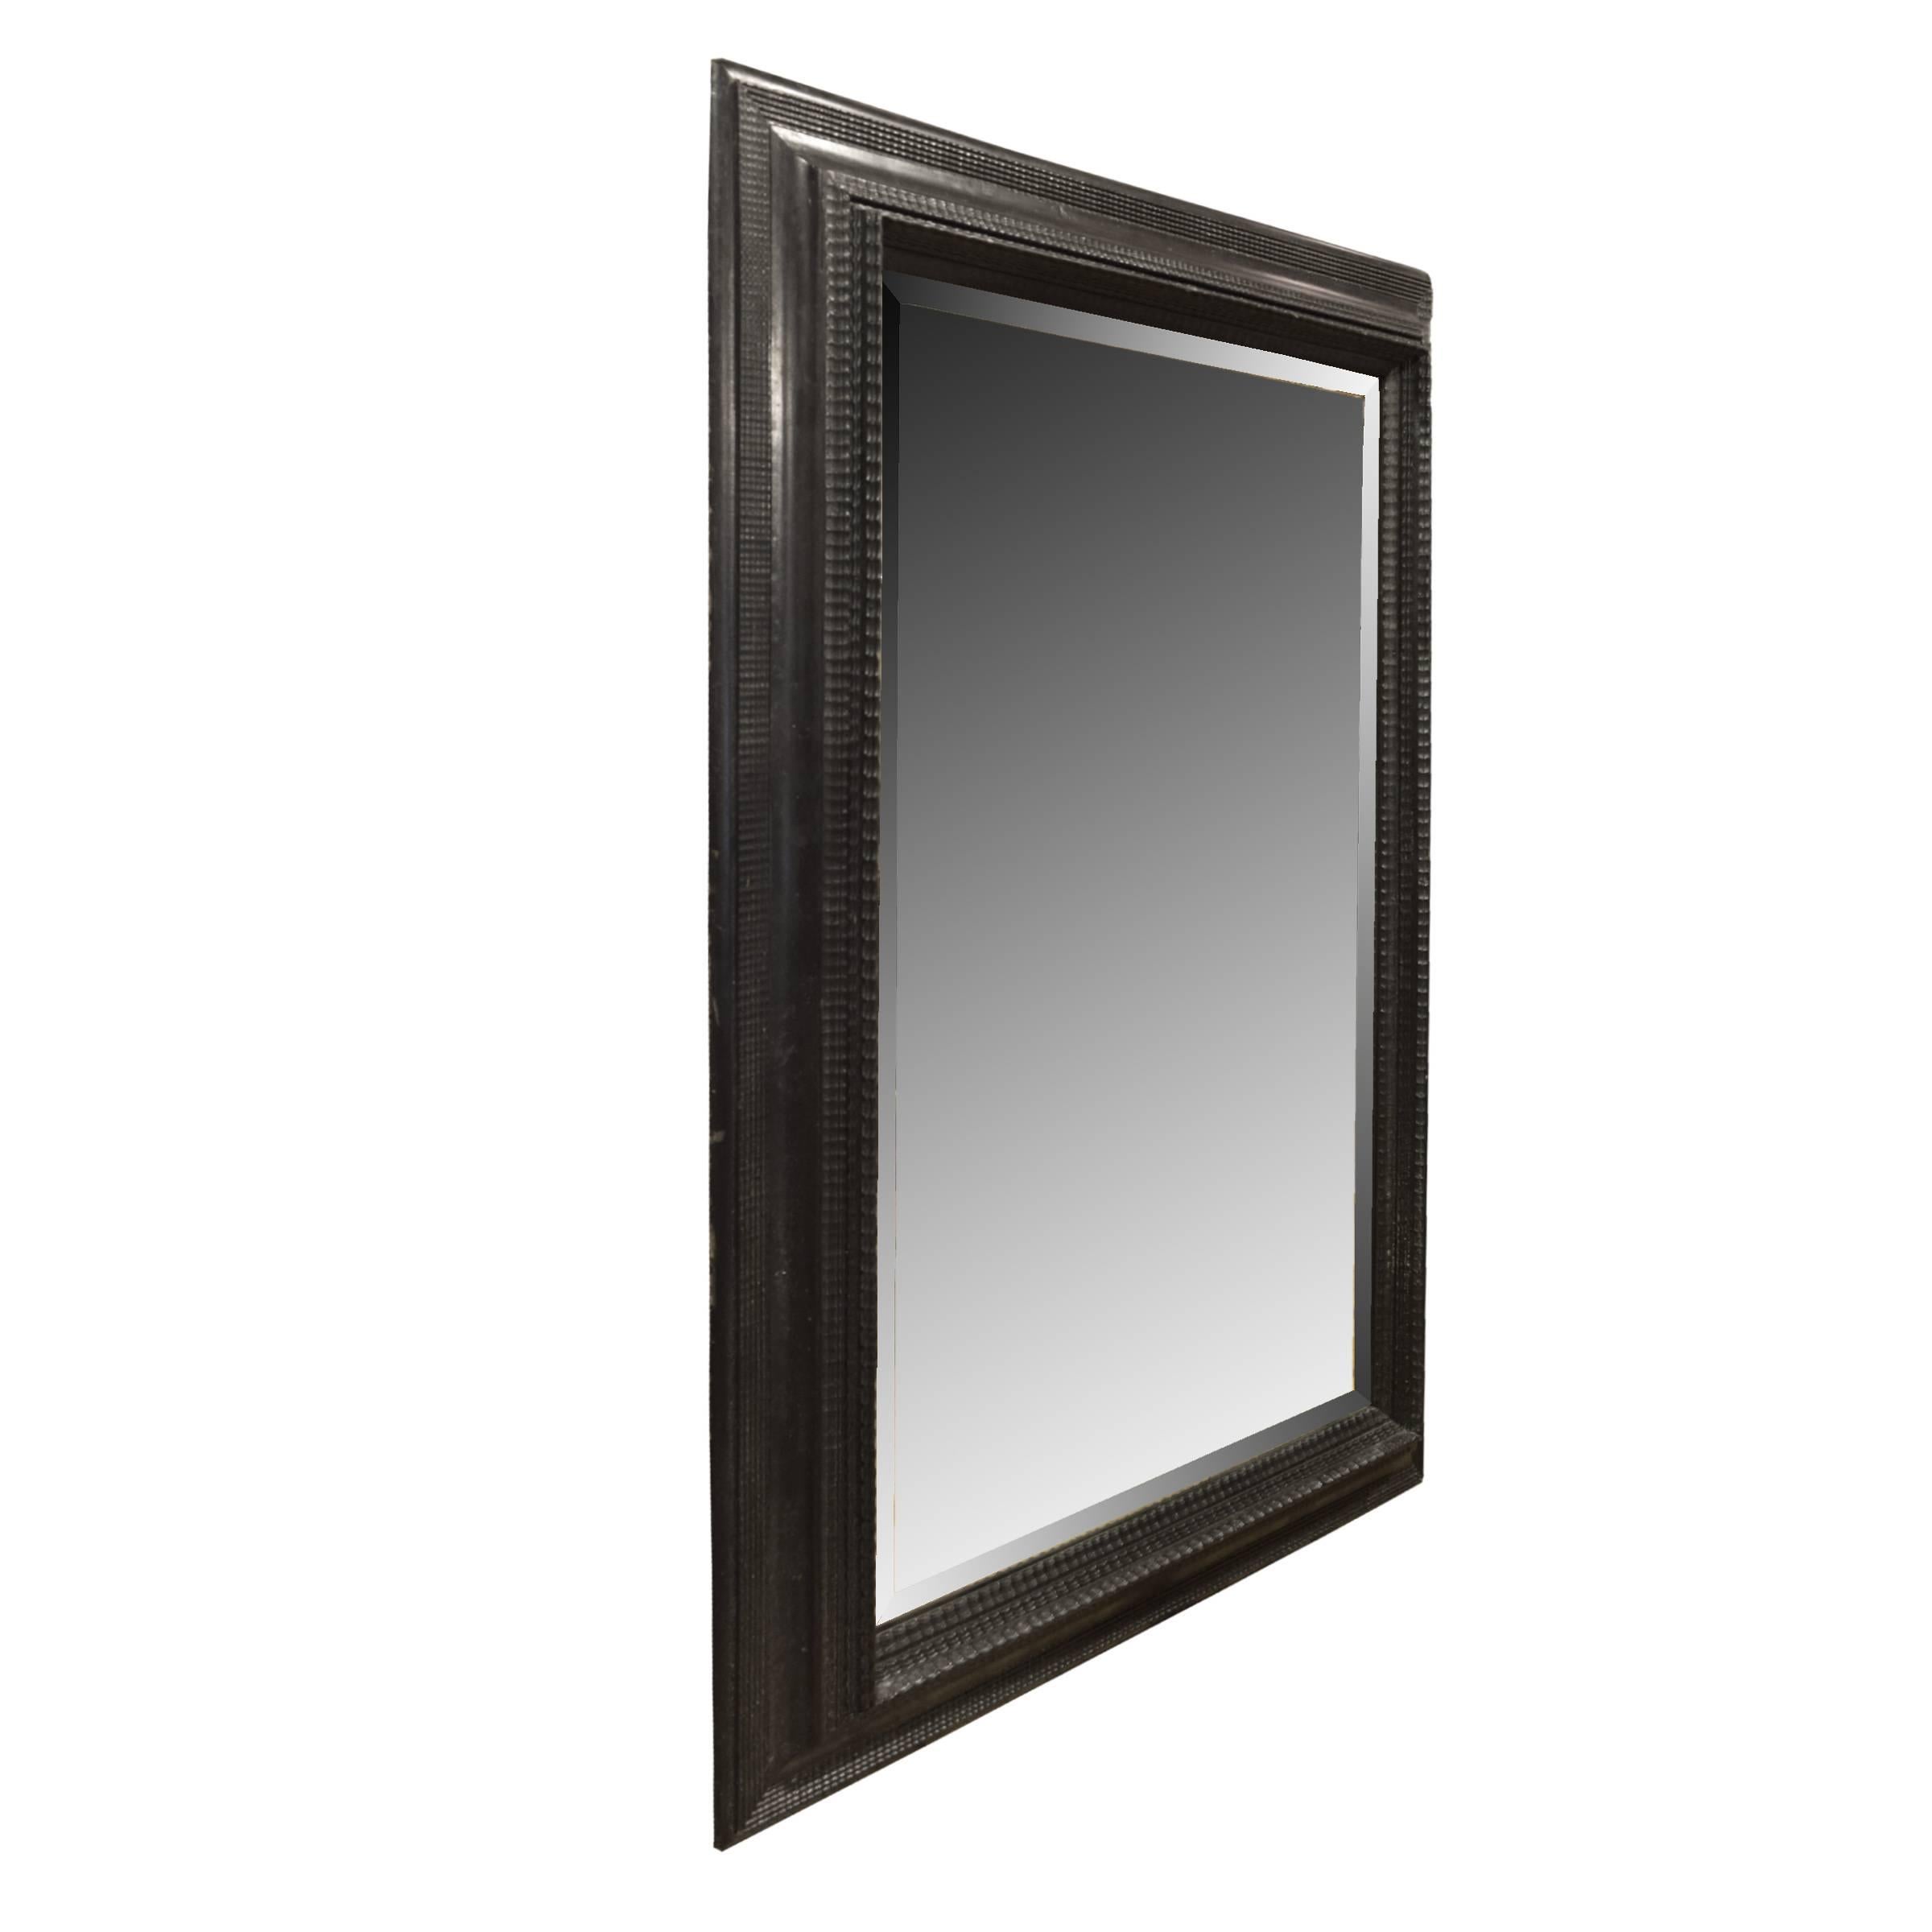 An Italian 19th century ebonized carved wood frame with a beveled mirror.